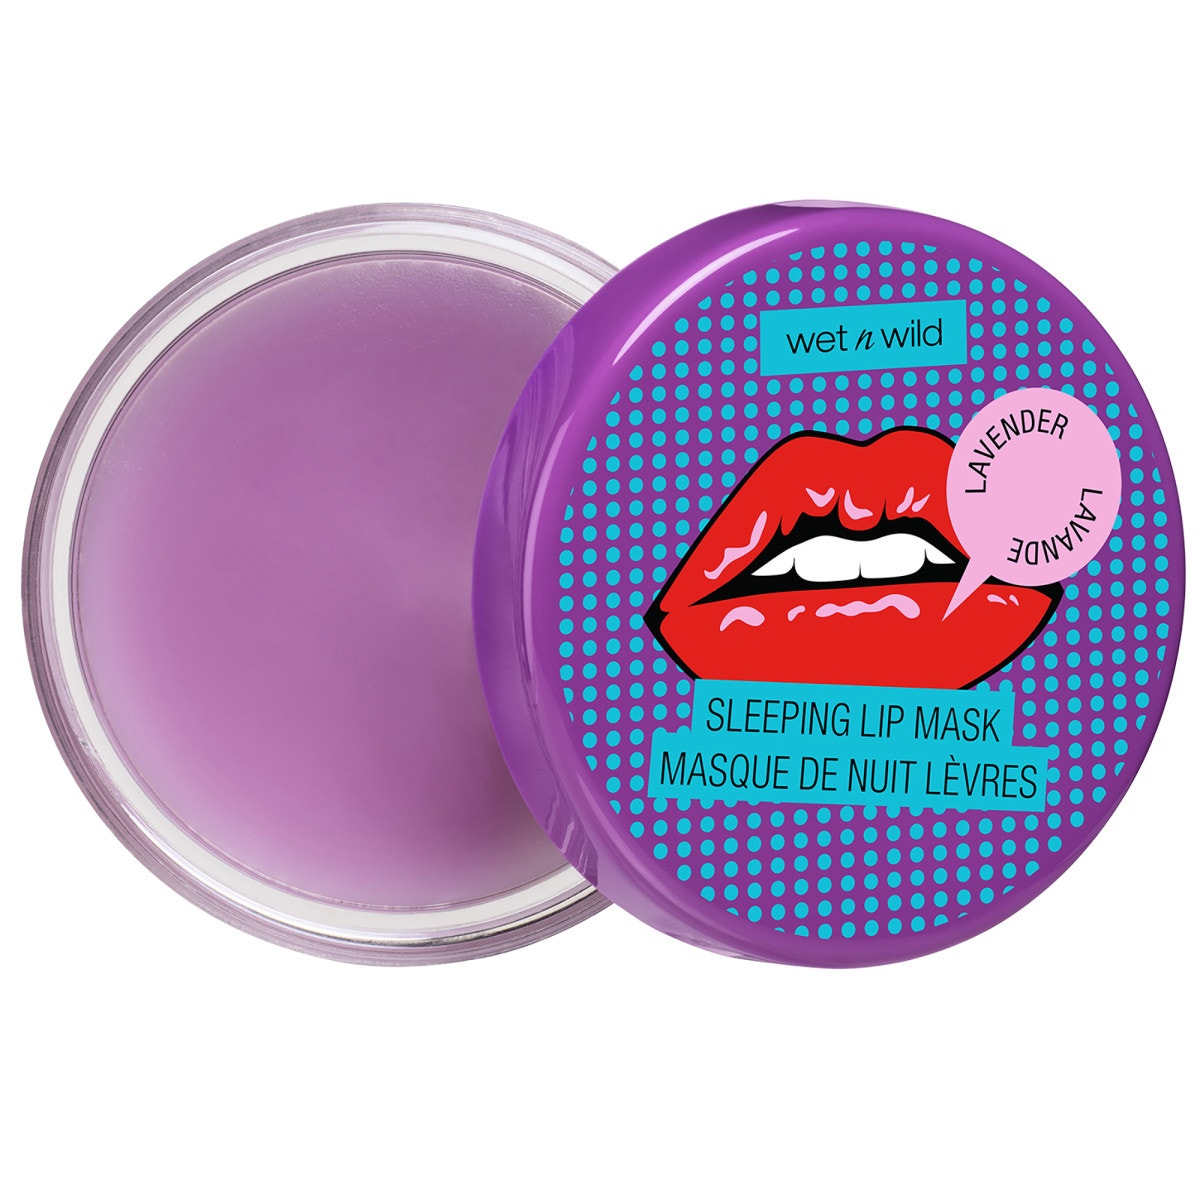 Perfecting The Pout: Lip Masks And Their Benefits